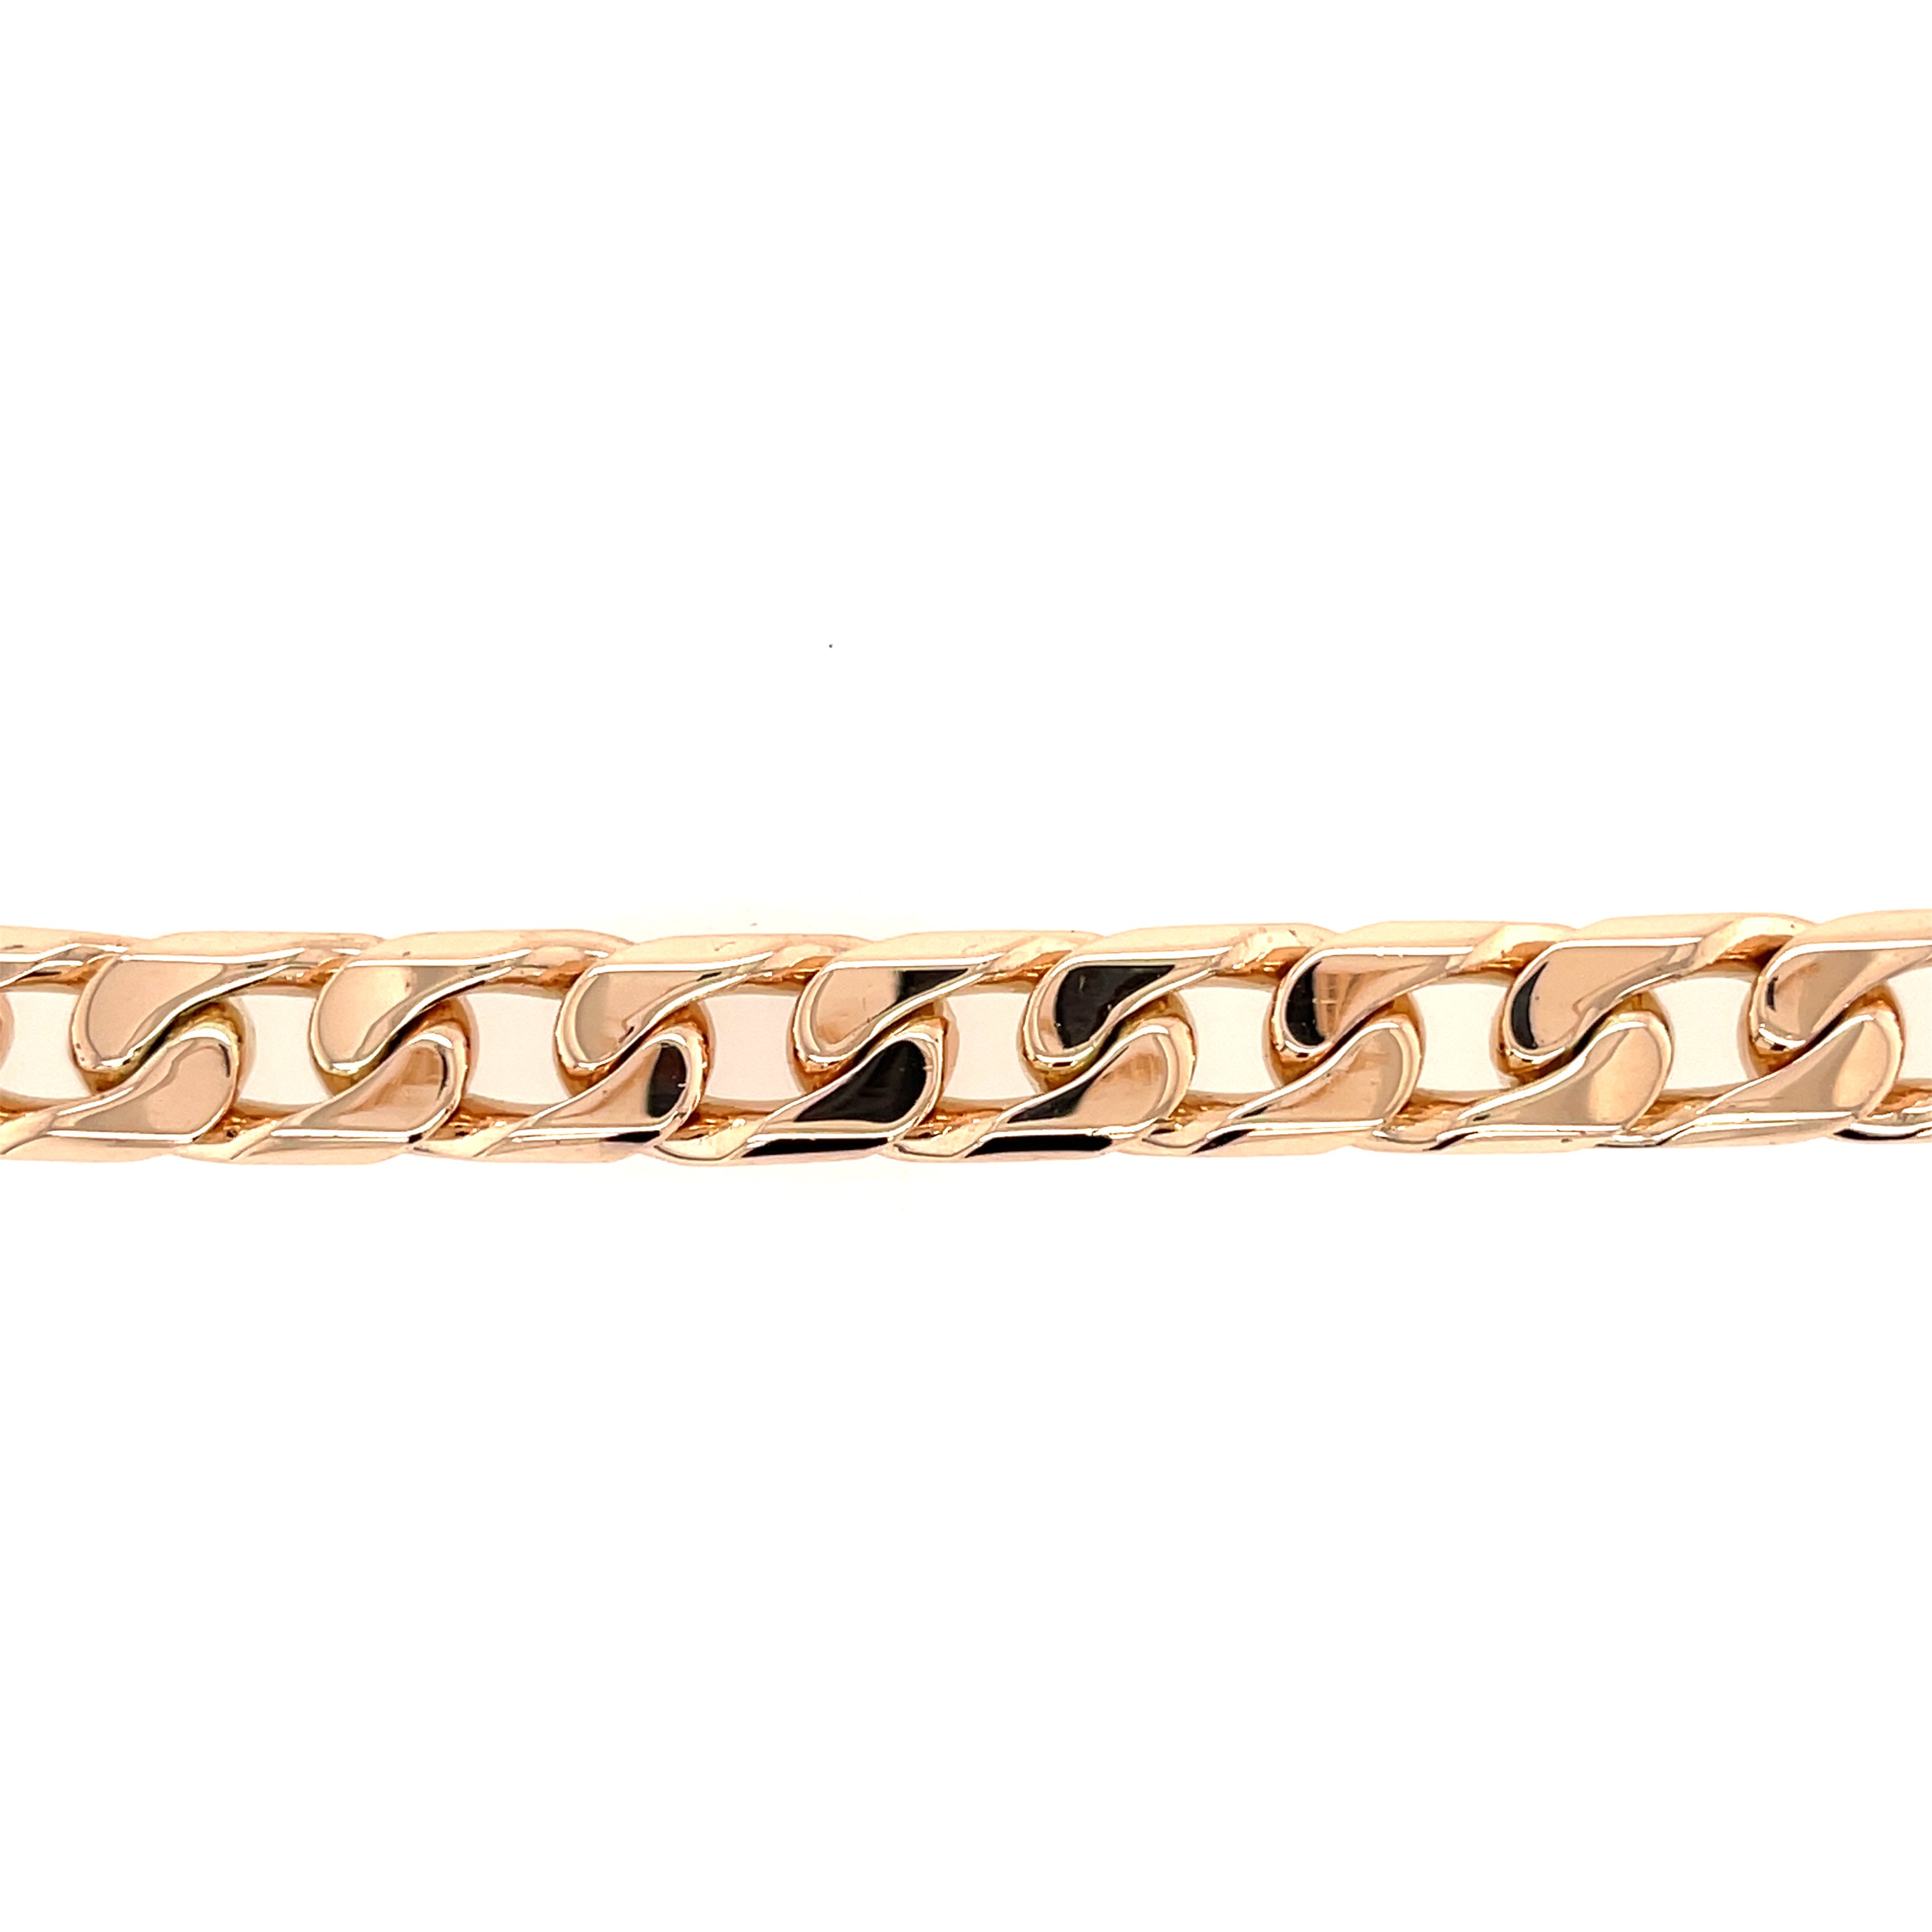 9ct Yellow Gold 9.5 Inch Heavy Curb Link Bracelet - 53.56g SOLD